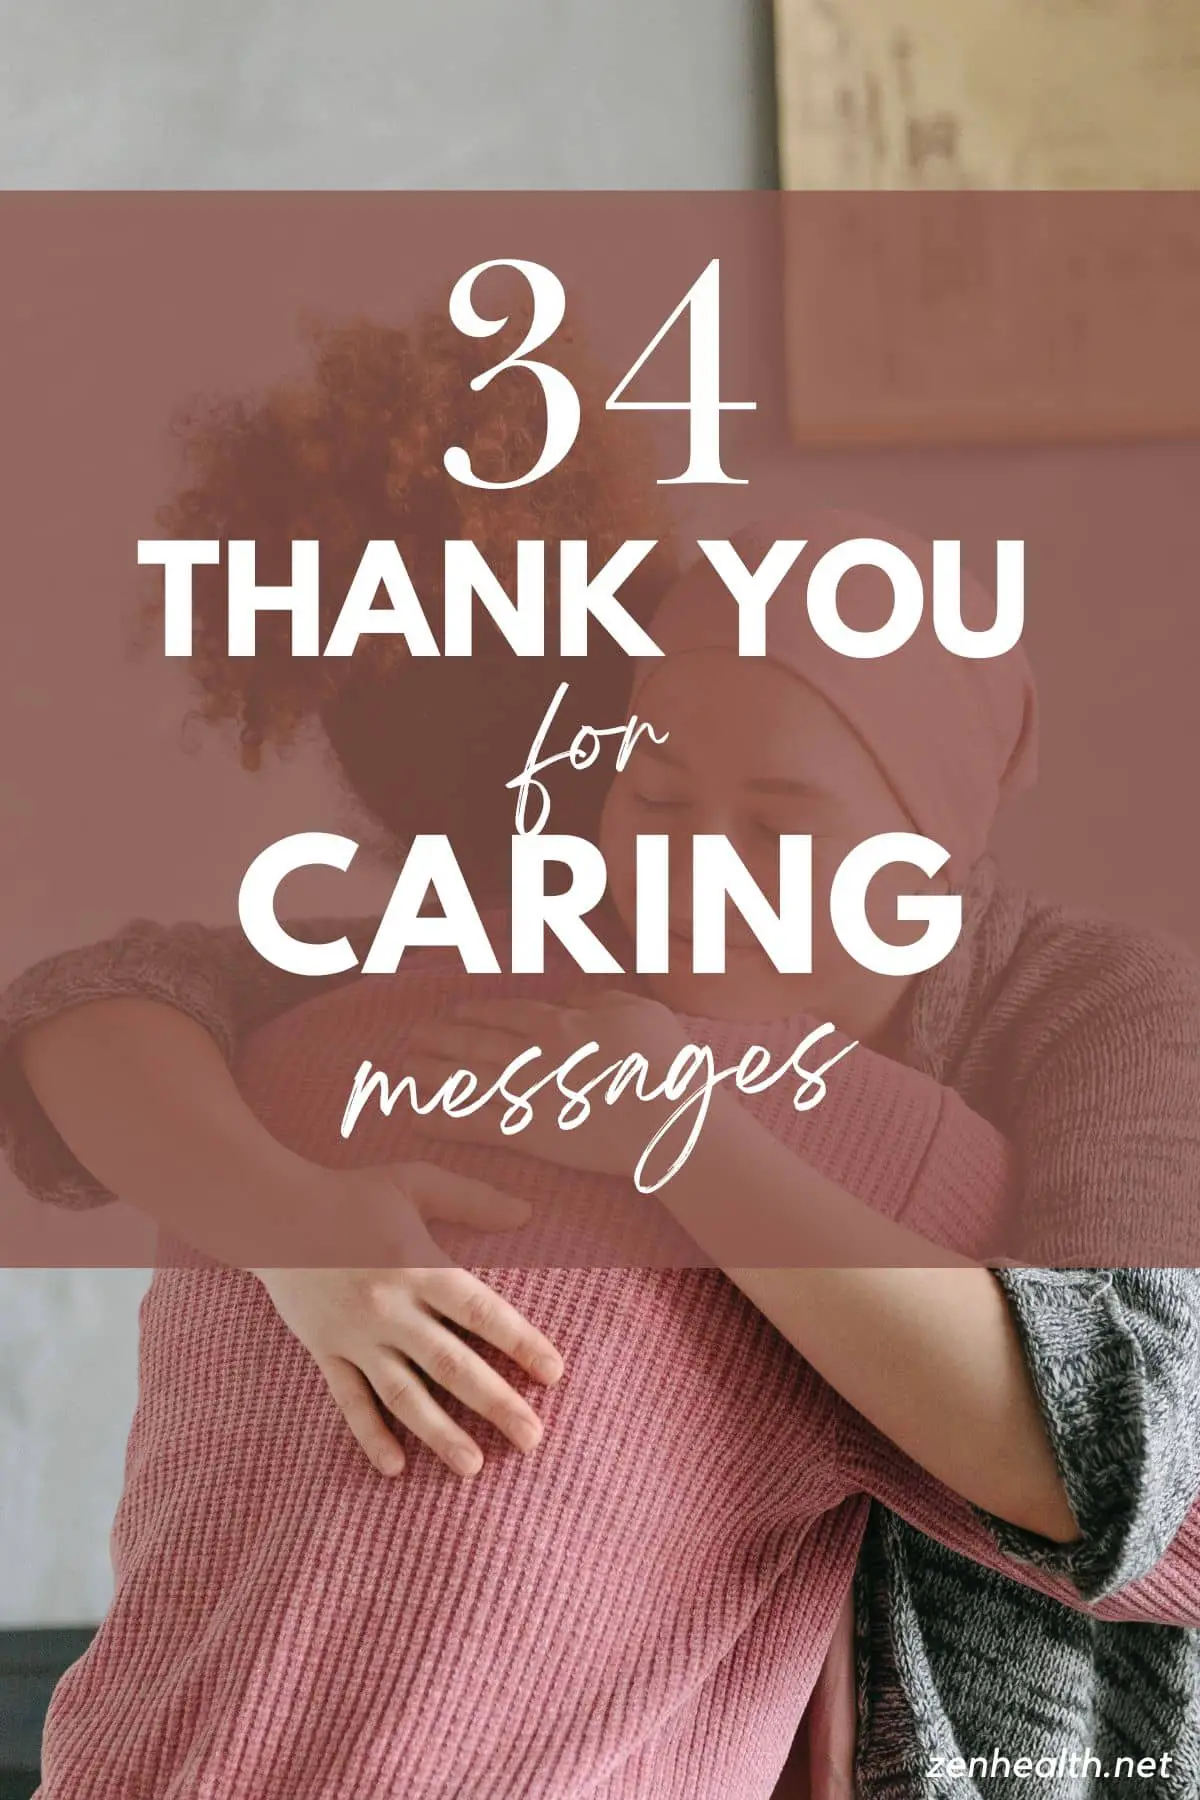 34 thank you for caring messages text overlaid on two women hugging